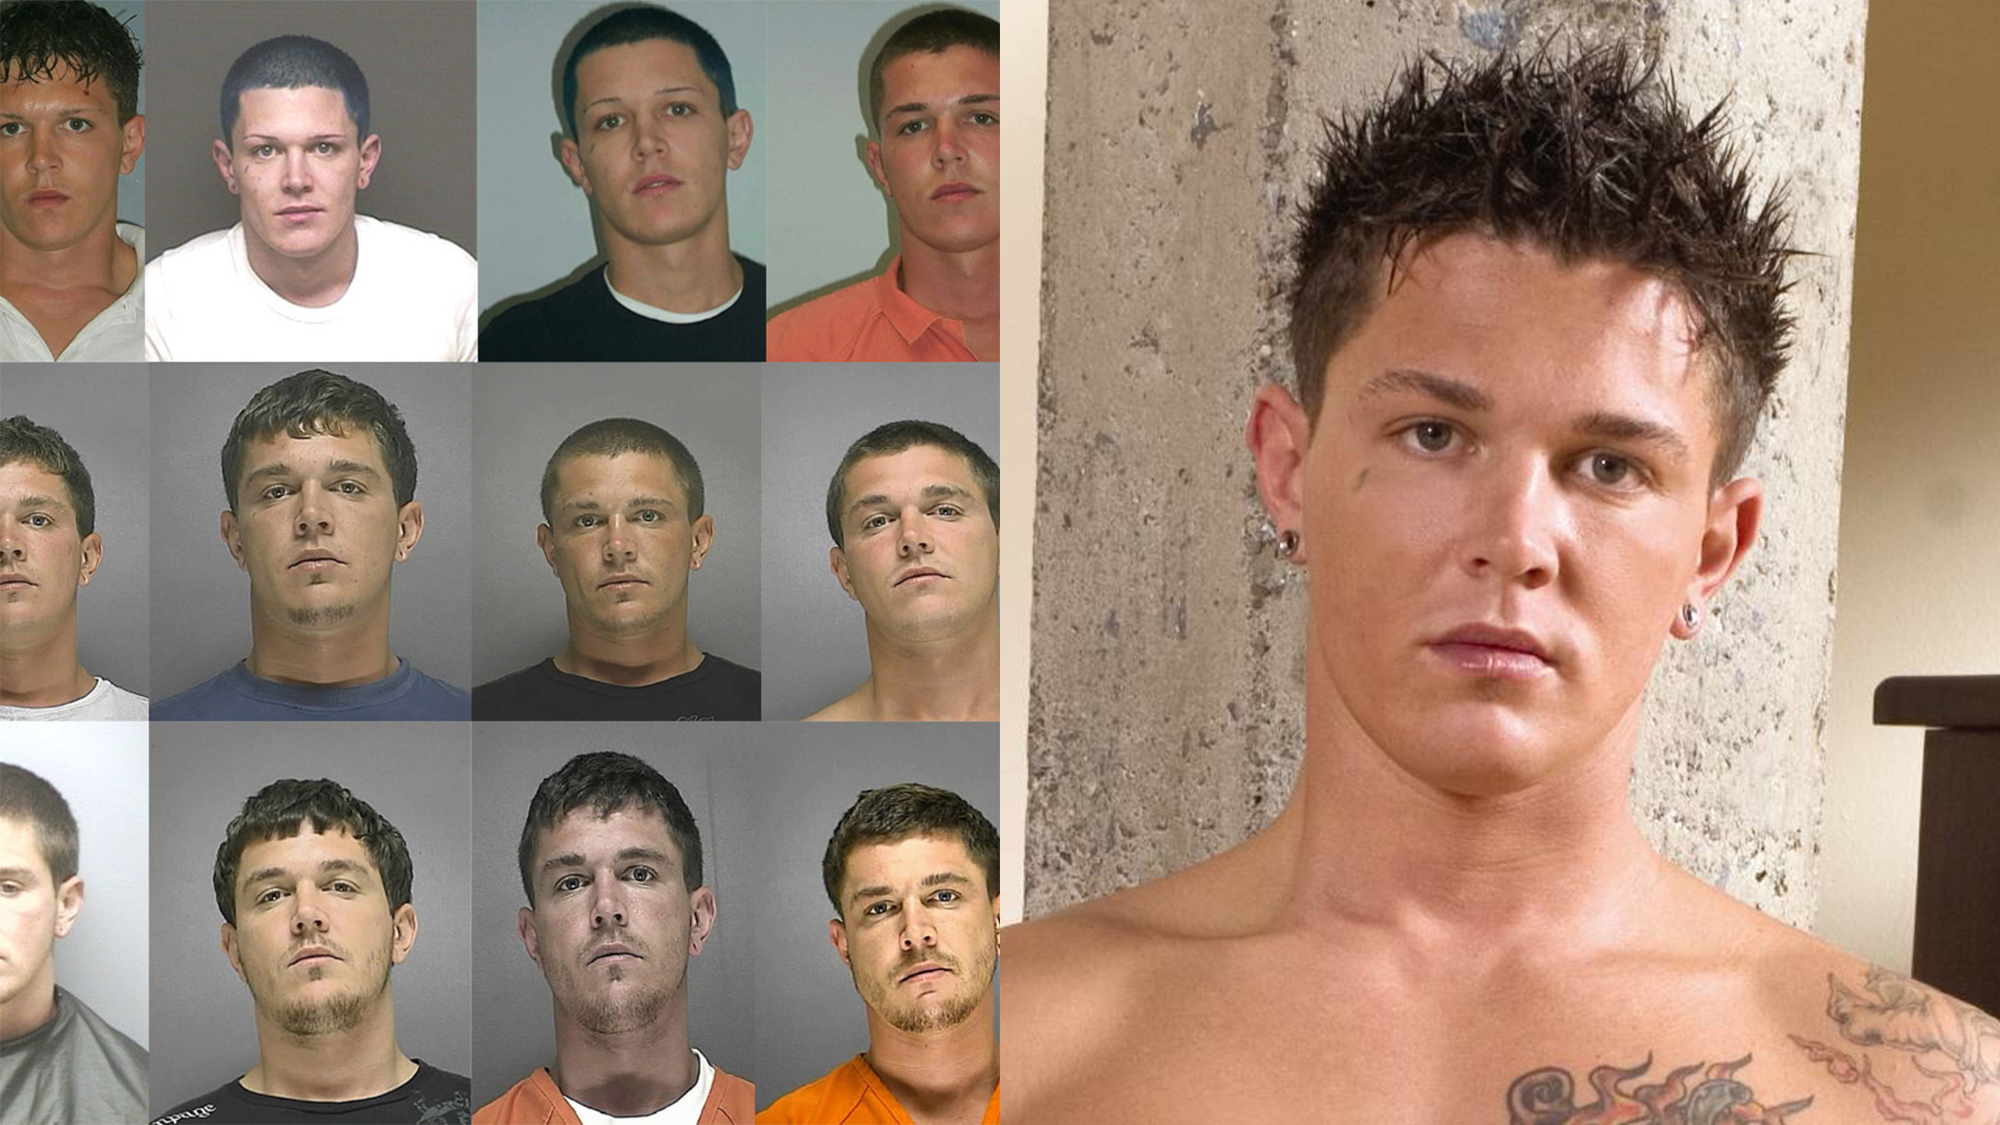 Youngest Gay Porn Actors - Gay Porn Star & Convicted Sex Offender Sebastian Young Shot Dead By Police  - TheSword.com